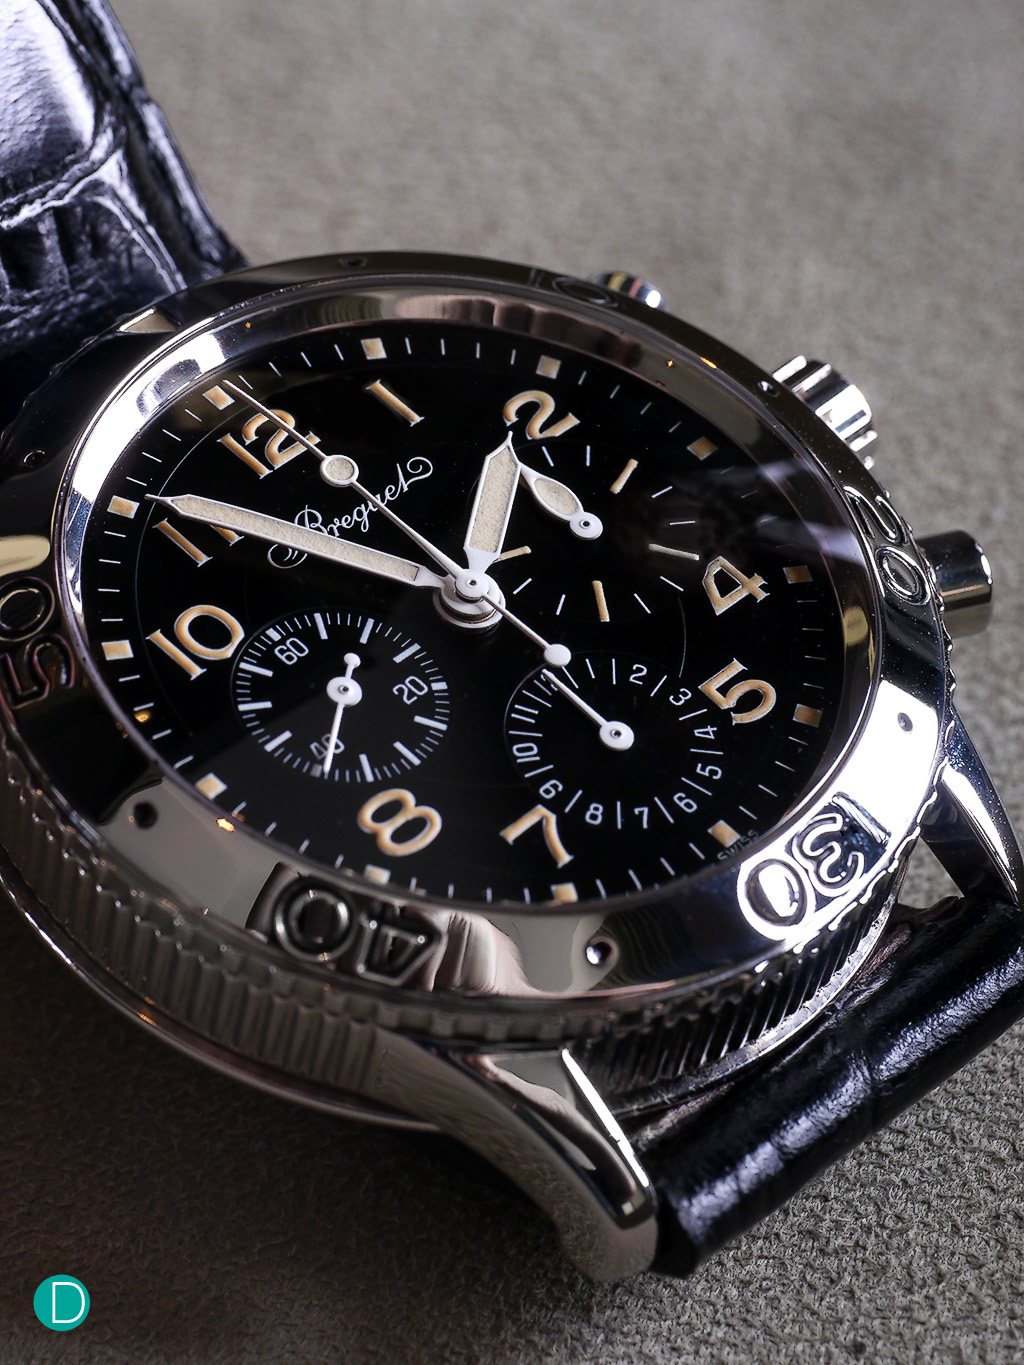 The older Type XX with the tritium dial.